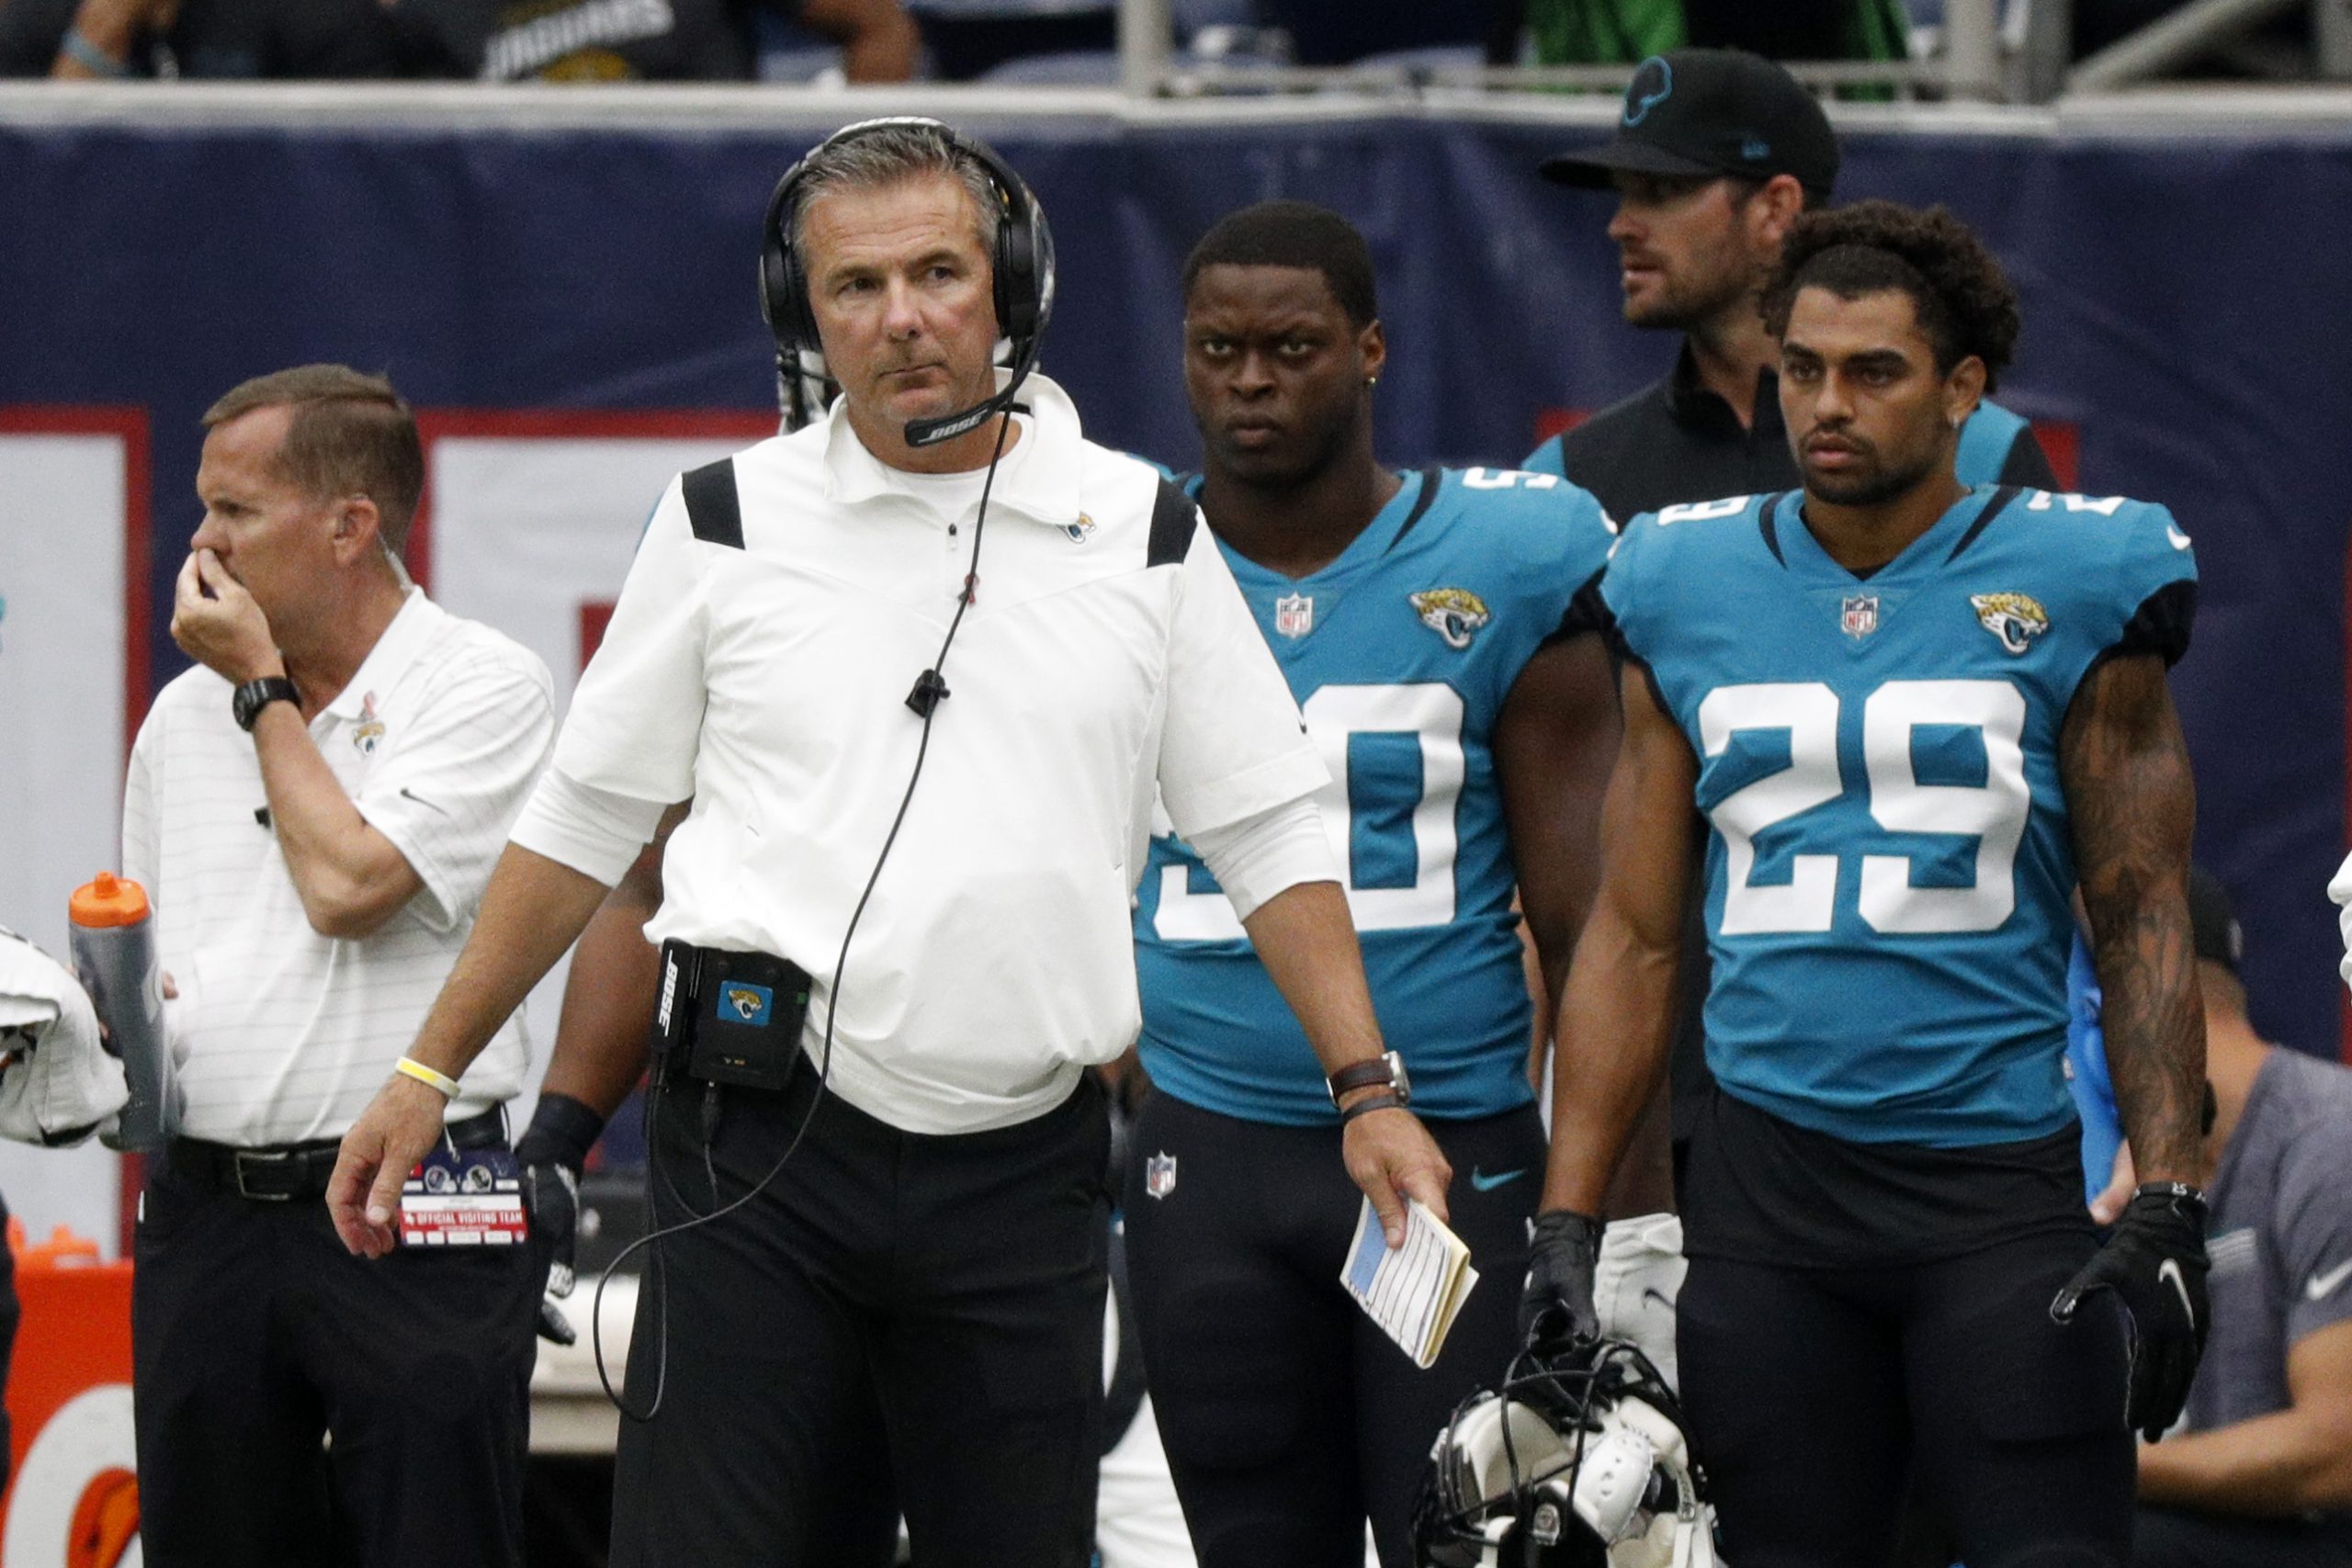 Head coach Urban Meyer of the Jacksonville Jaguars looks on during the game against the Houston Texans.